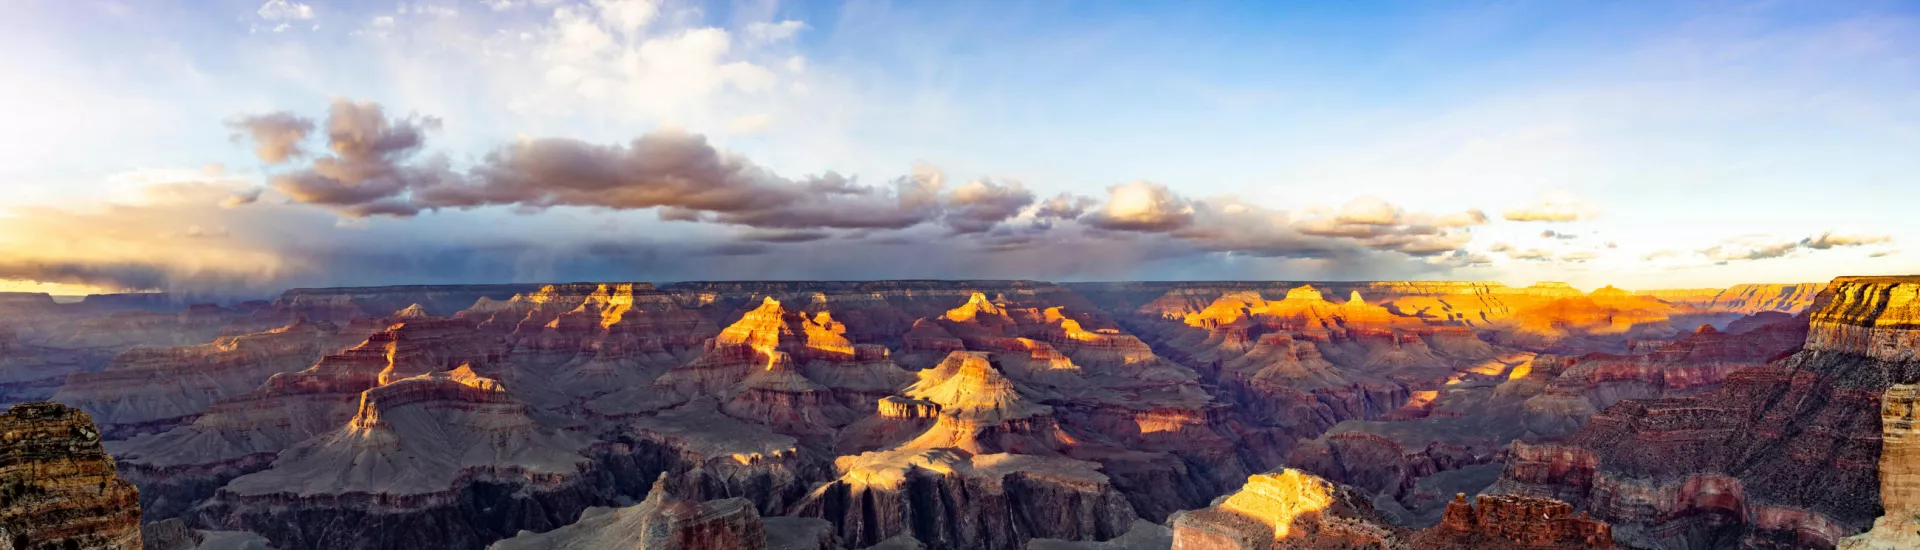 The Grand Canyon located at the South Rim in the United States